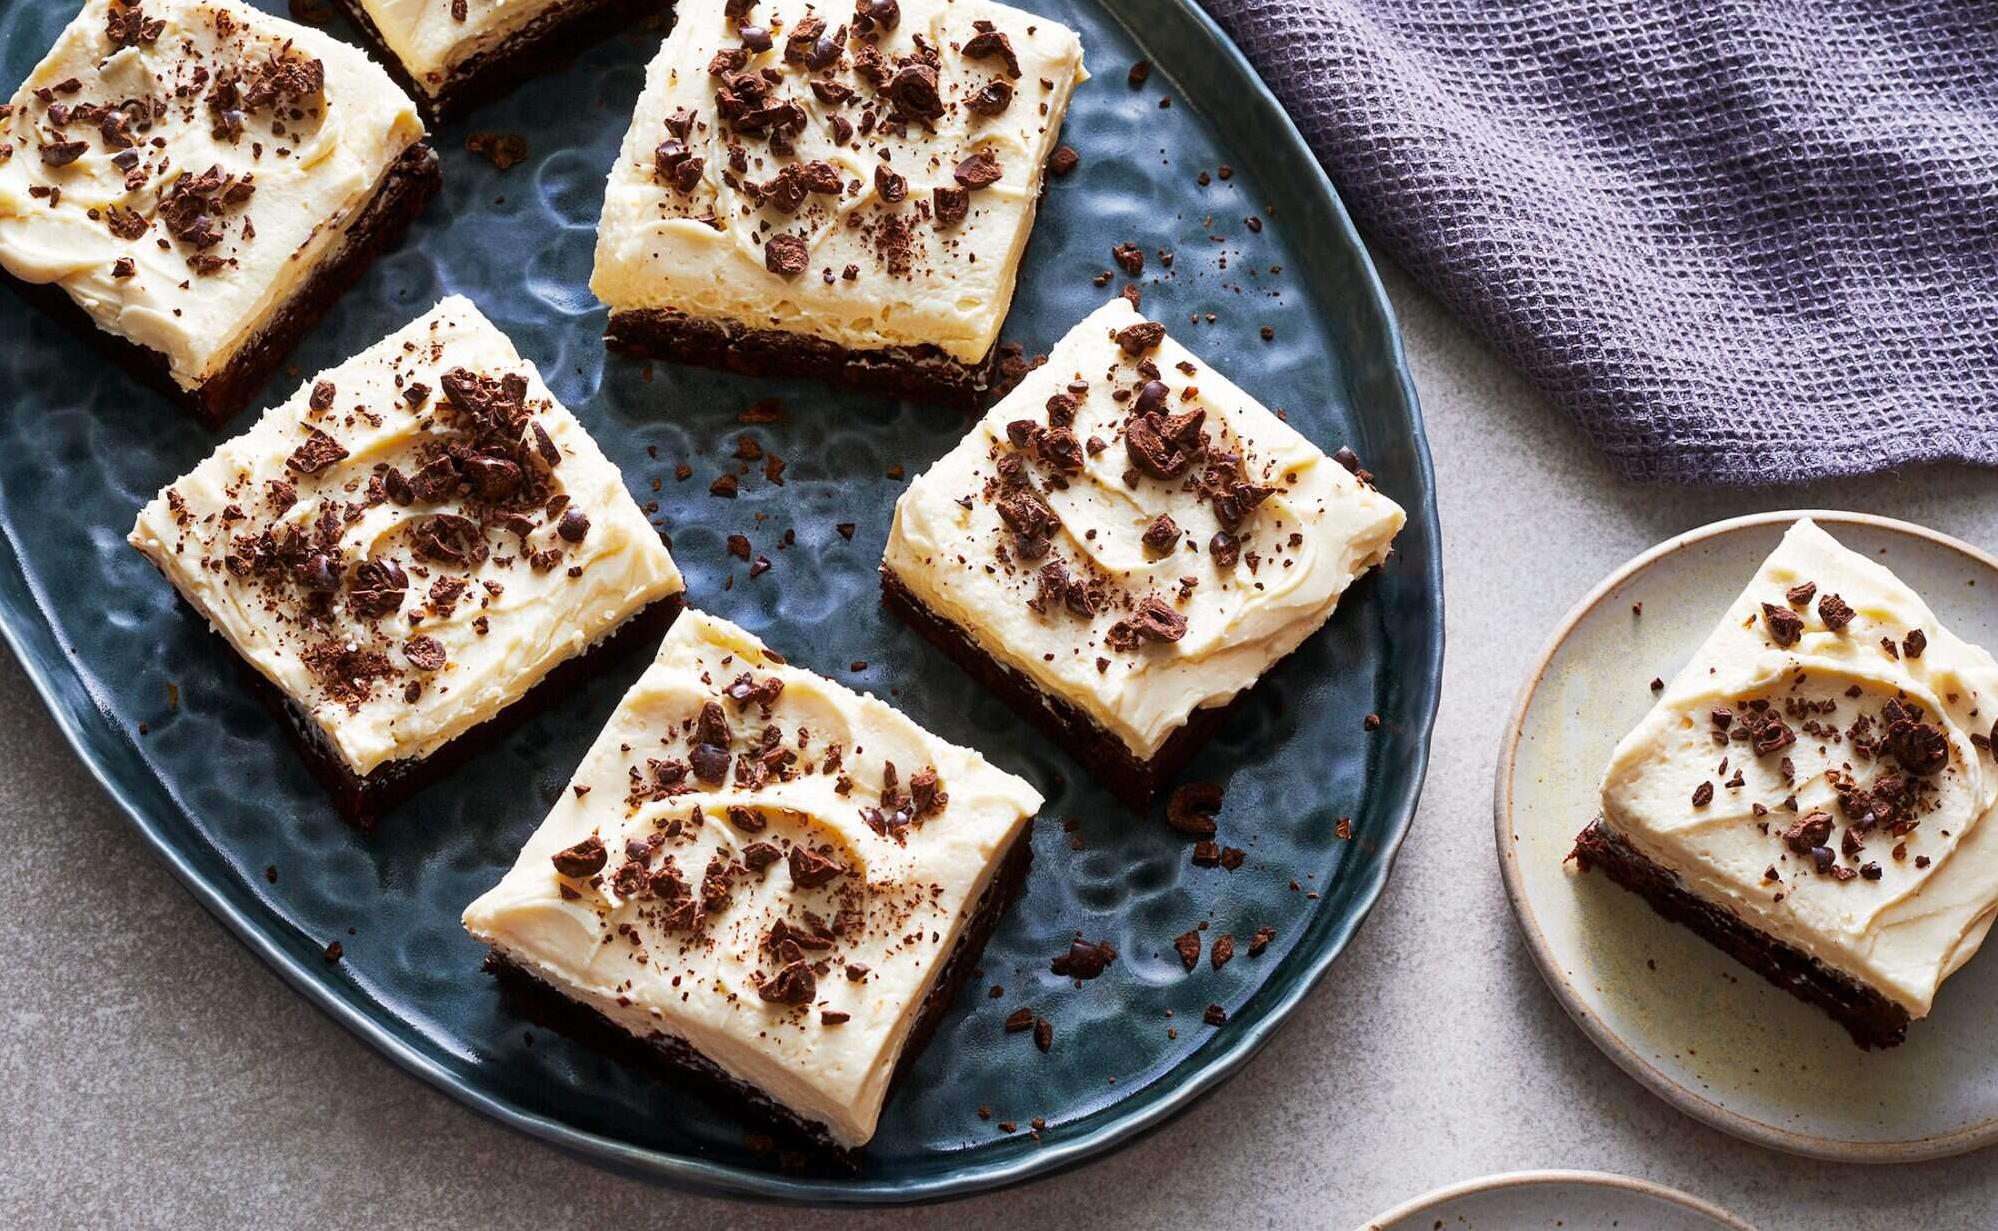  Decadent Baileys Irish Cream brownies in bite-sized portions - perfect for sharing!